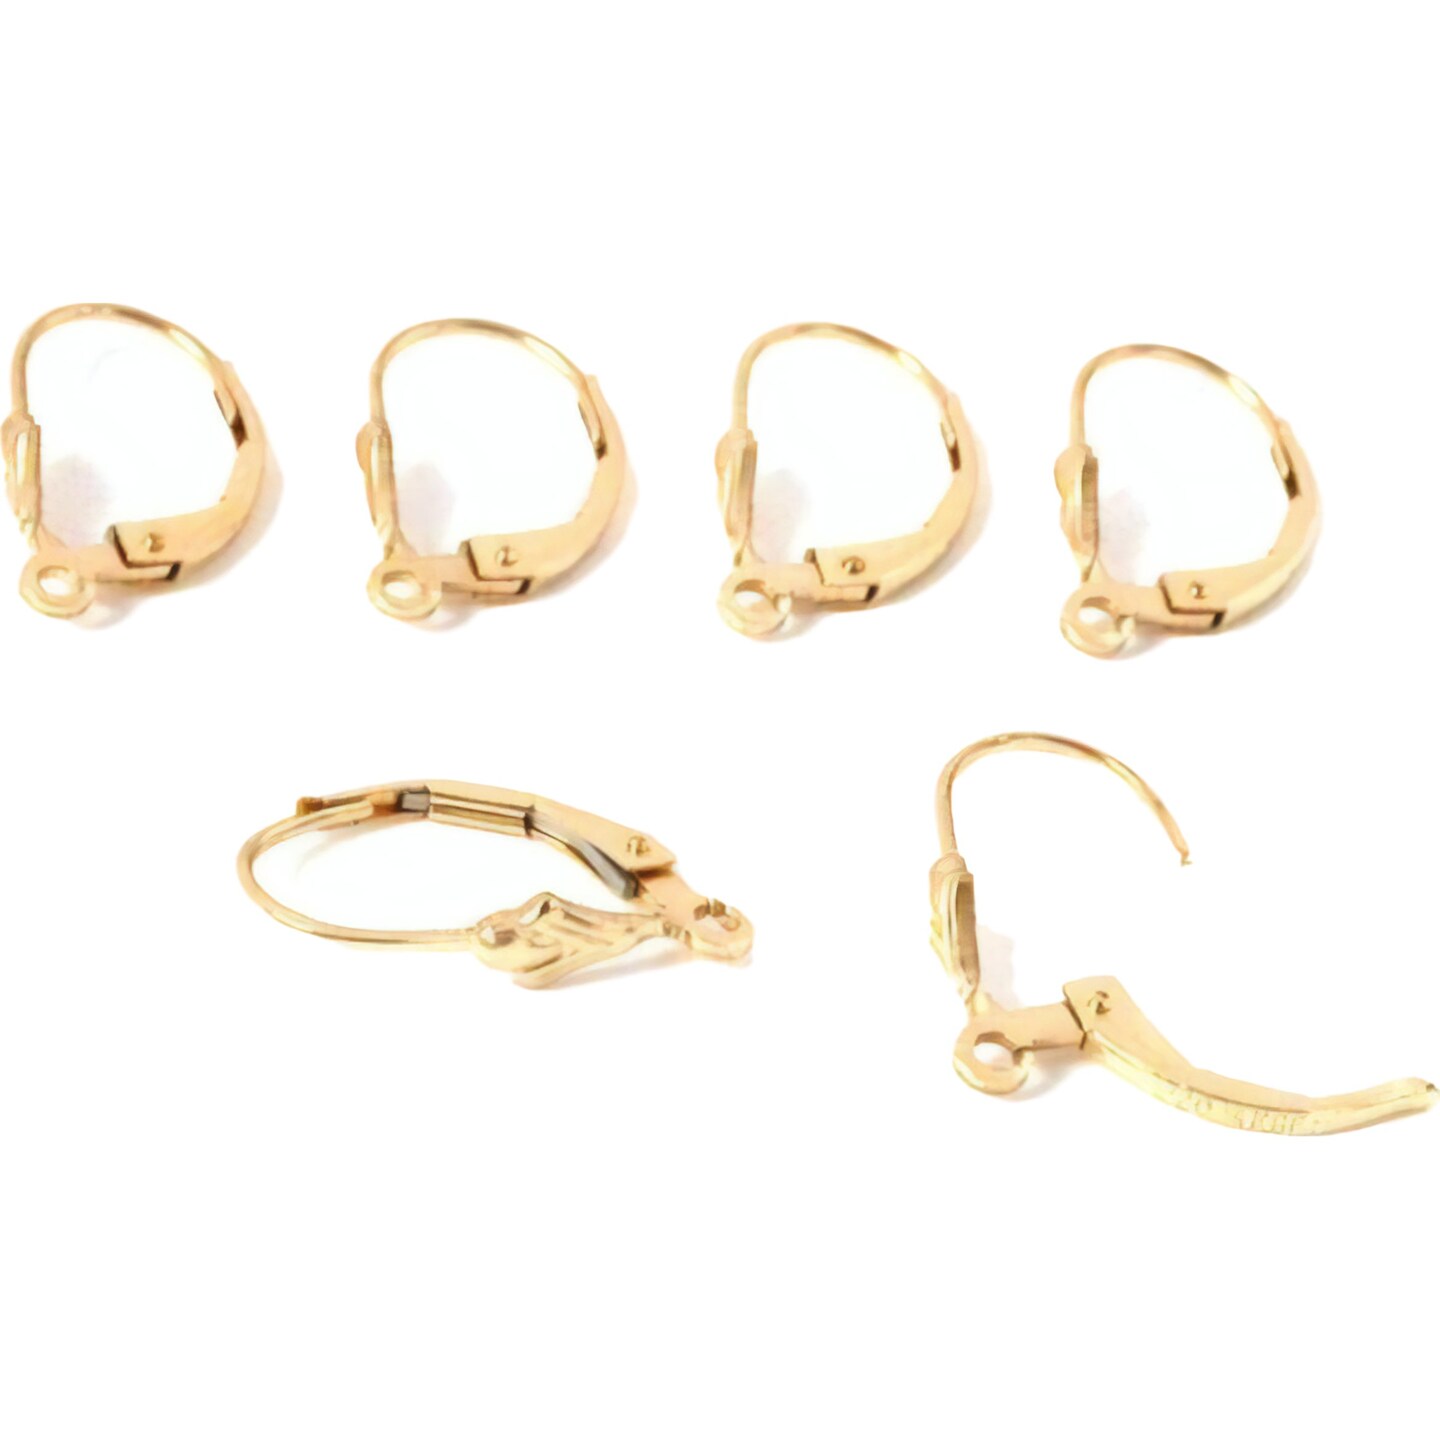 6 14k Gold Filled Lever Back Earrings Jewelry Parts